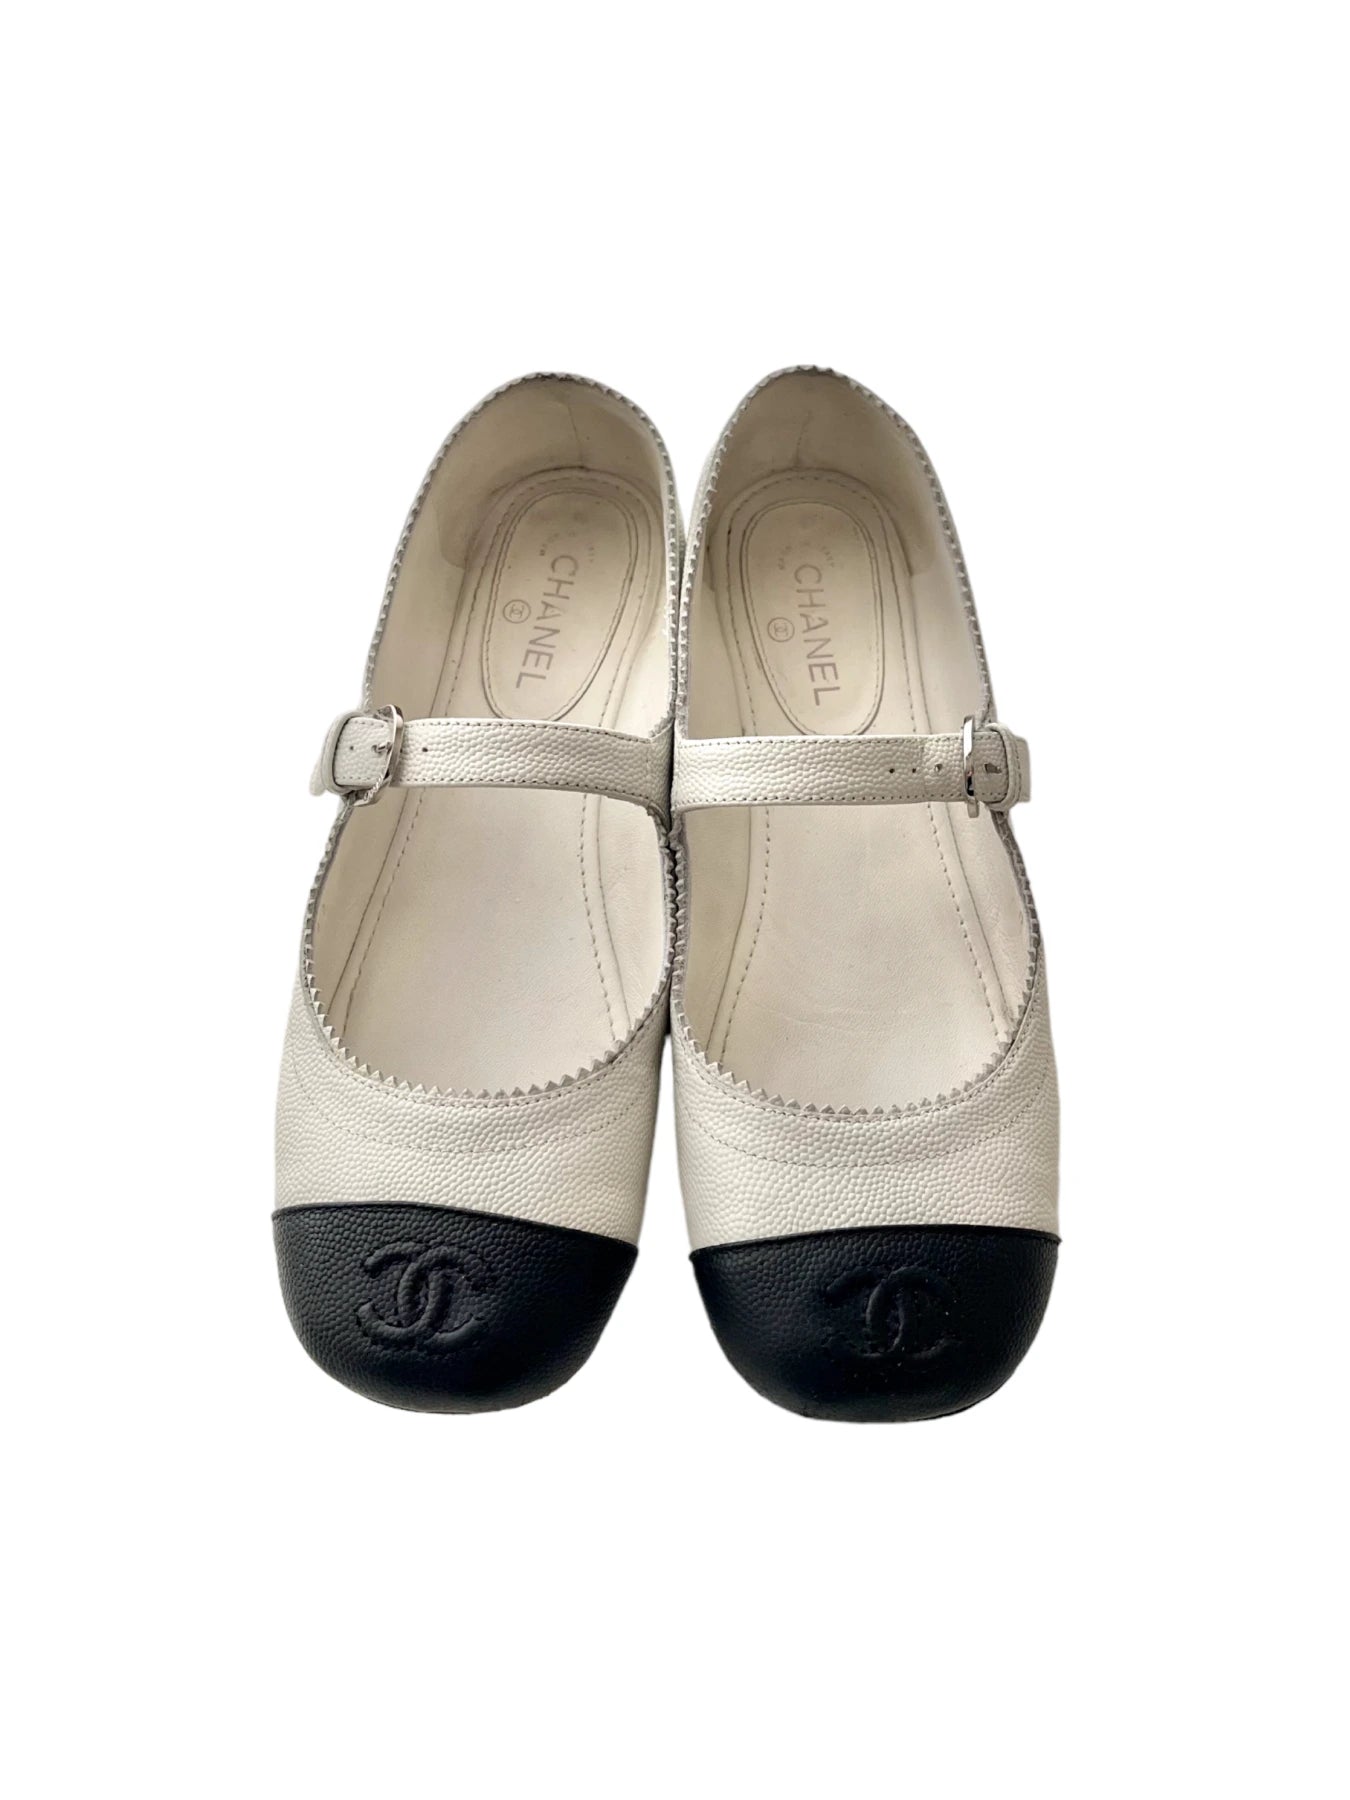 CHANEL Mary Janes, 35 – Archive Square